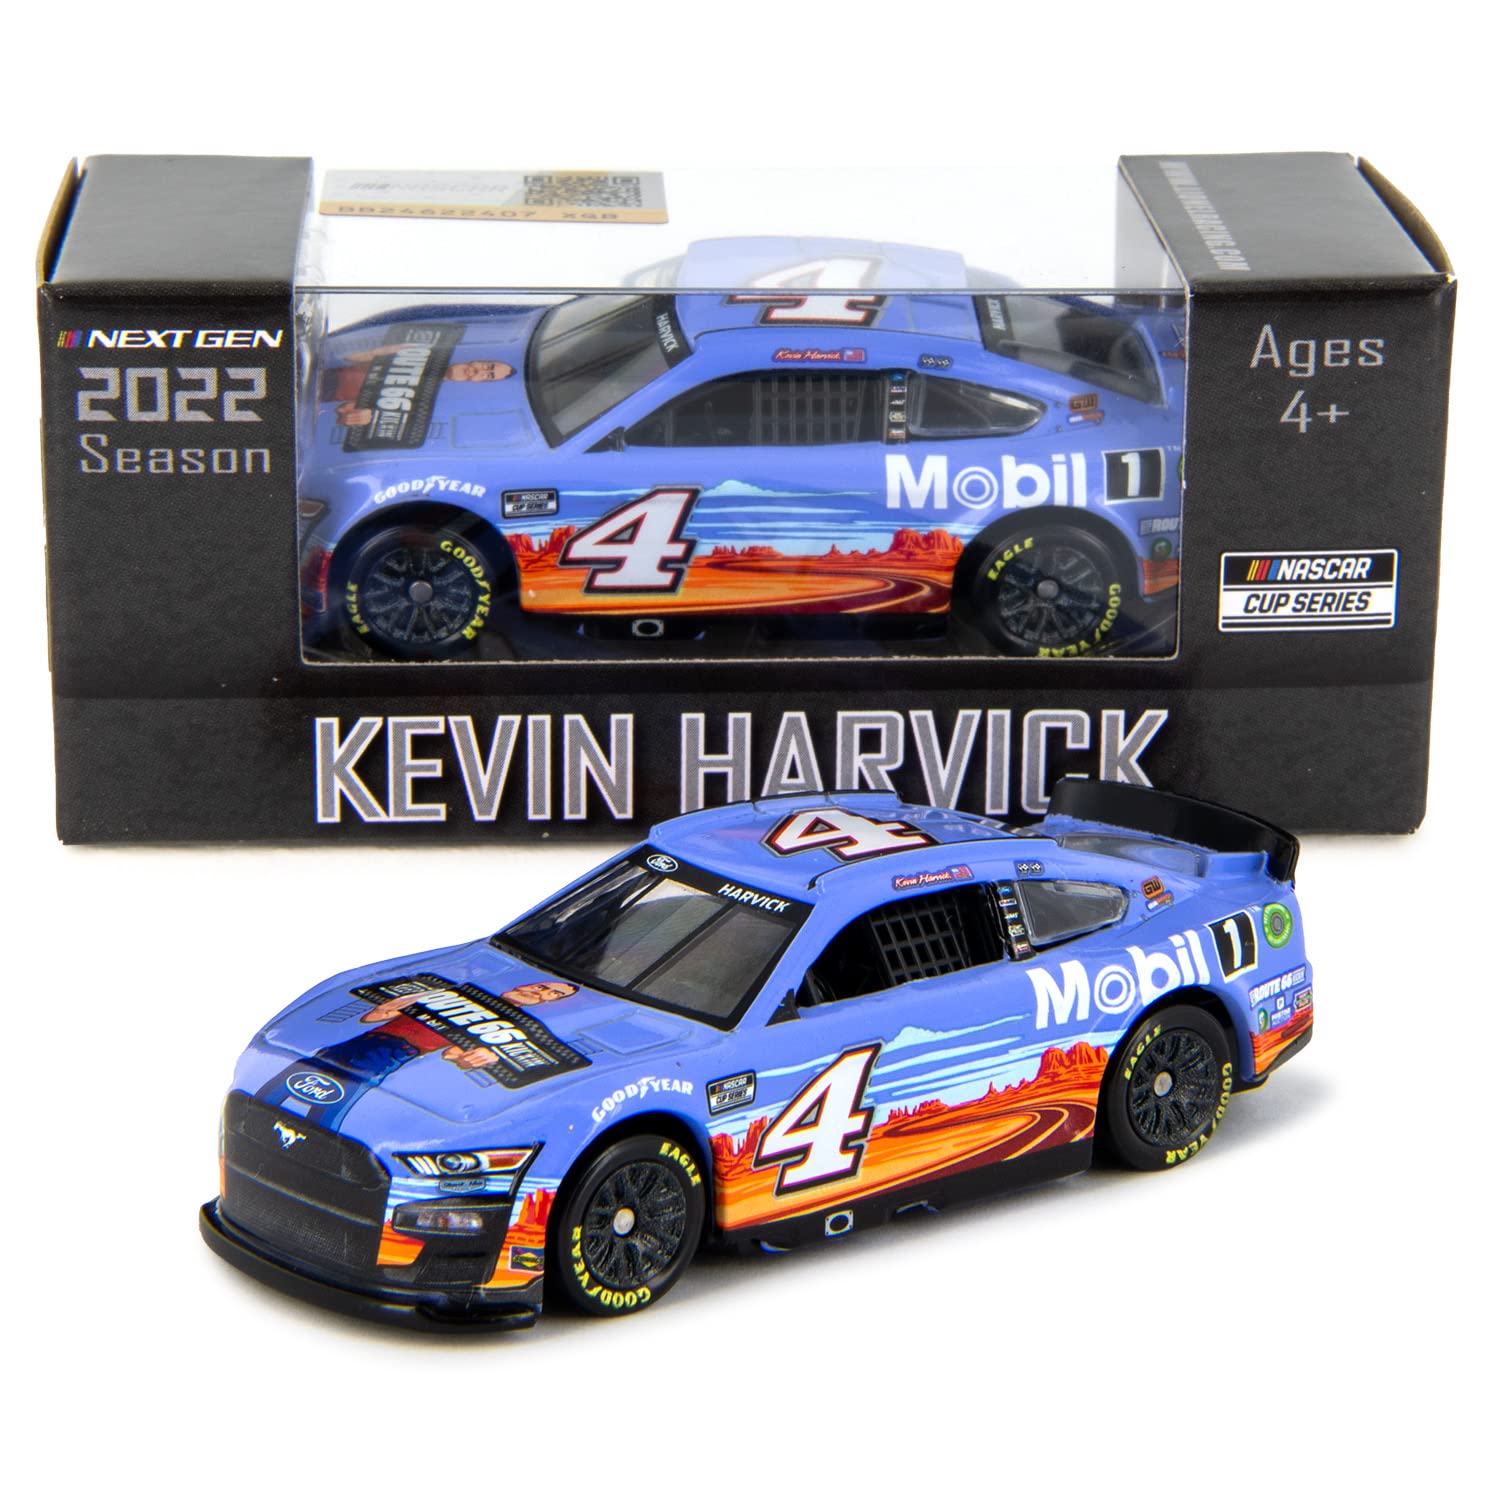 Lionel Racing Kevin Harvick 2022 Mobil 1 Route 66 Diecast Car 1:64 Scale